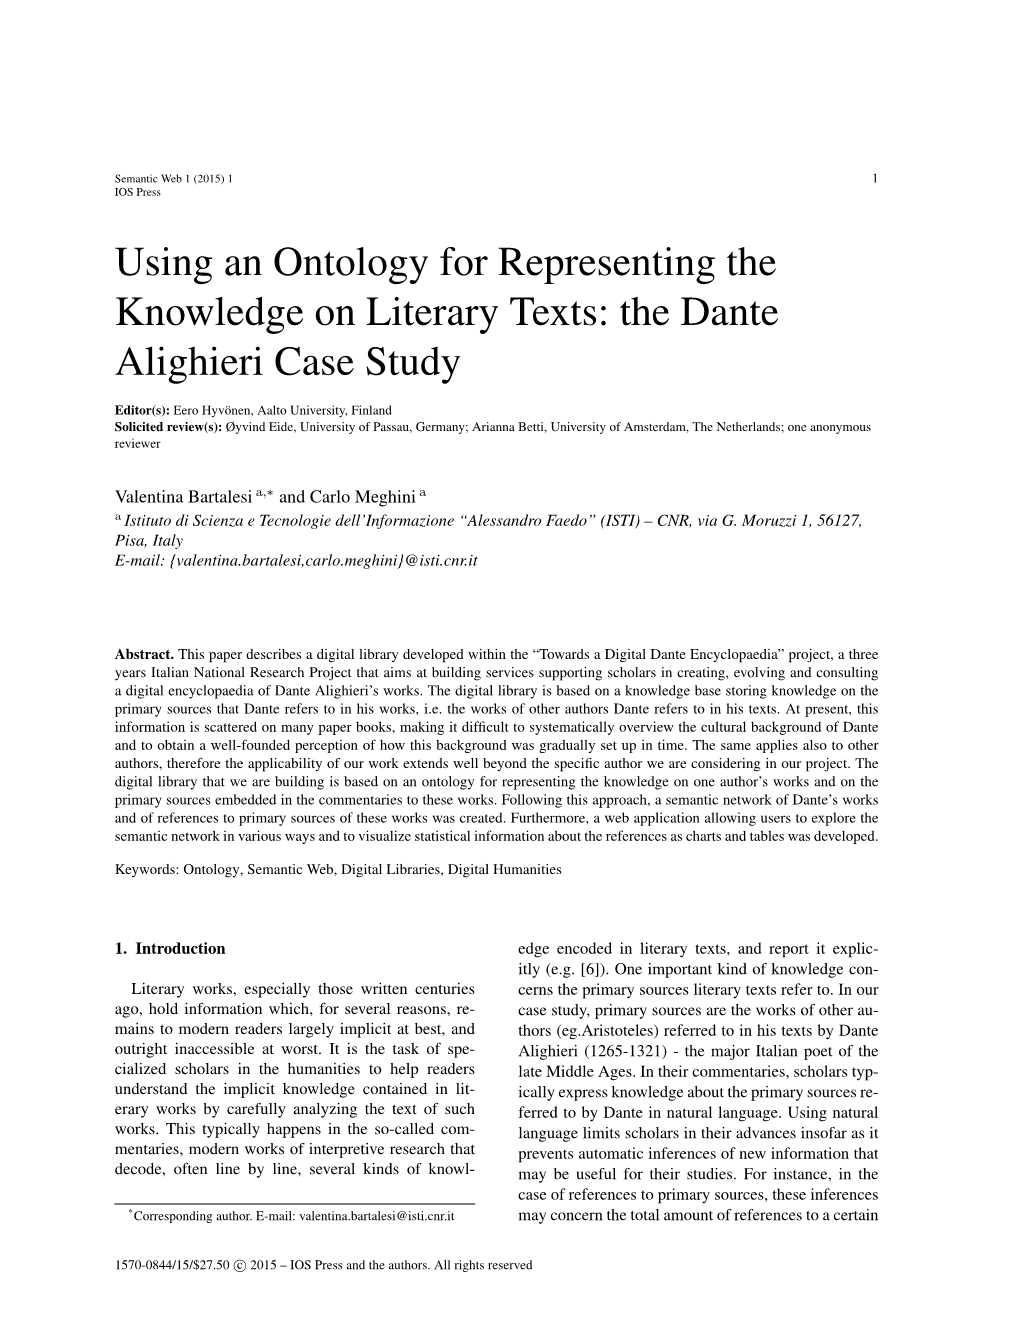 Using an Ontology for Representing the Knowledge on Literary Texts: the Dante Alighieri Case Study